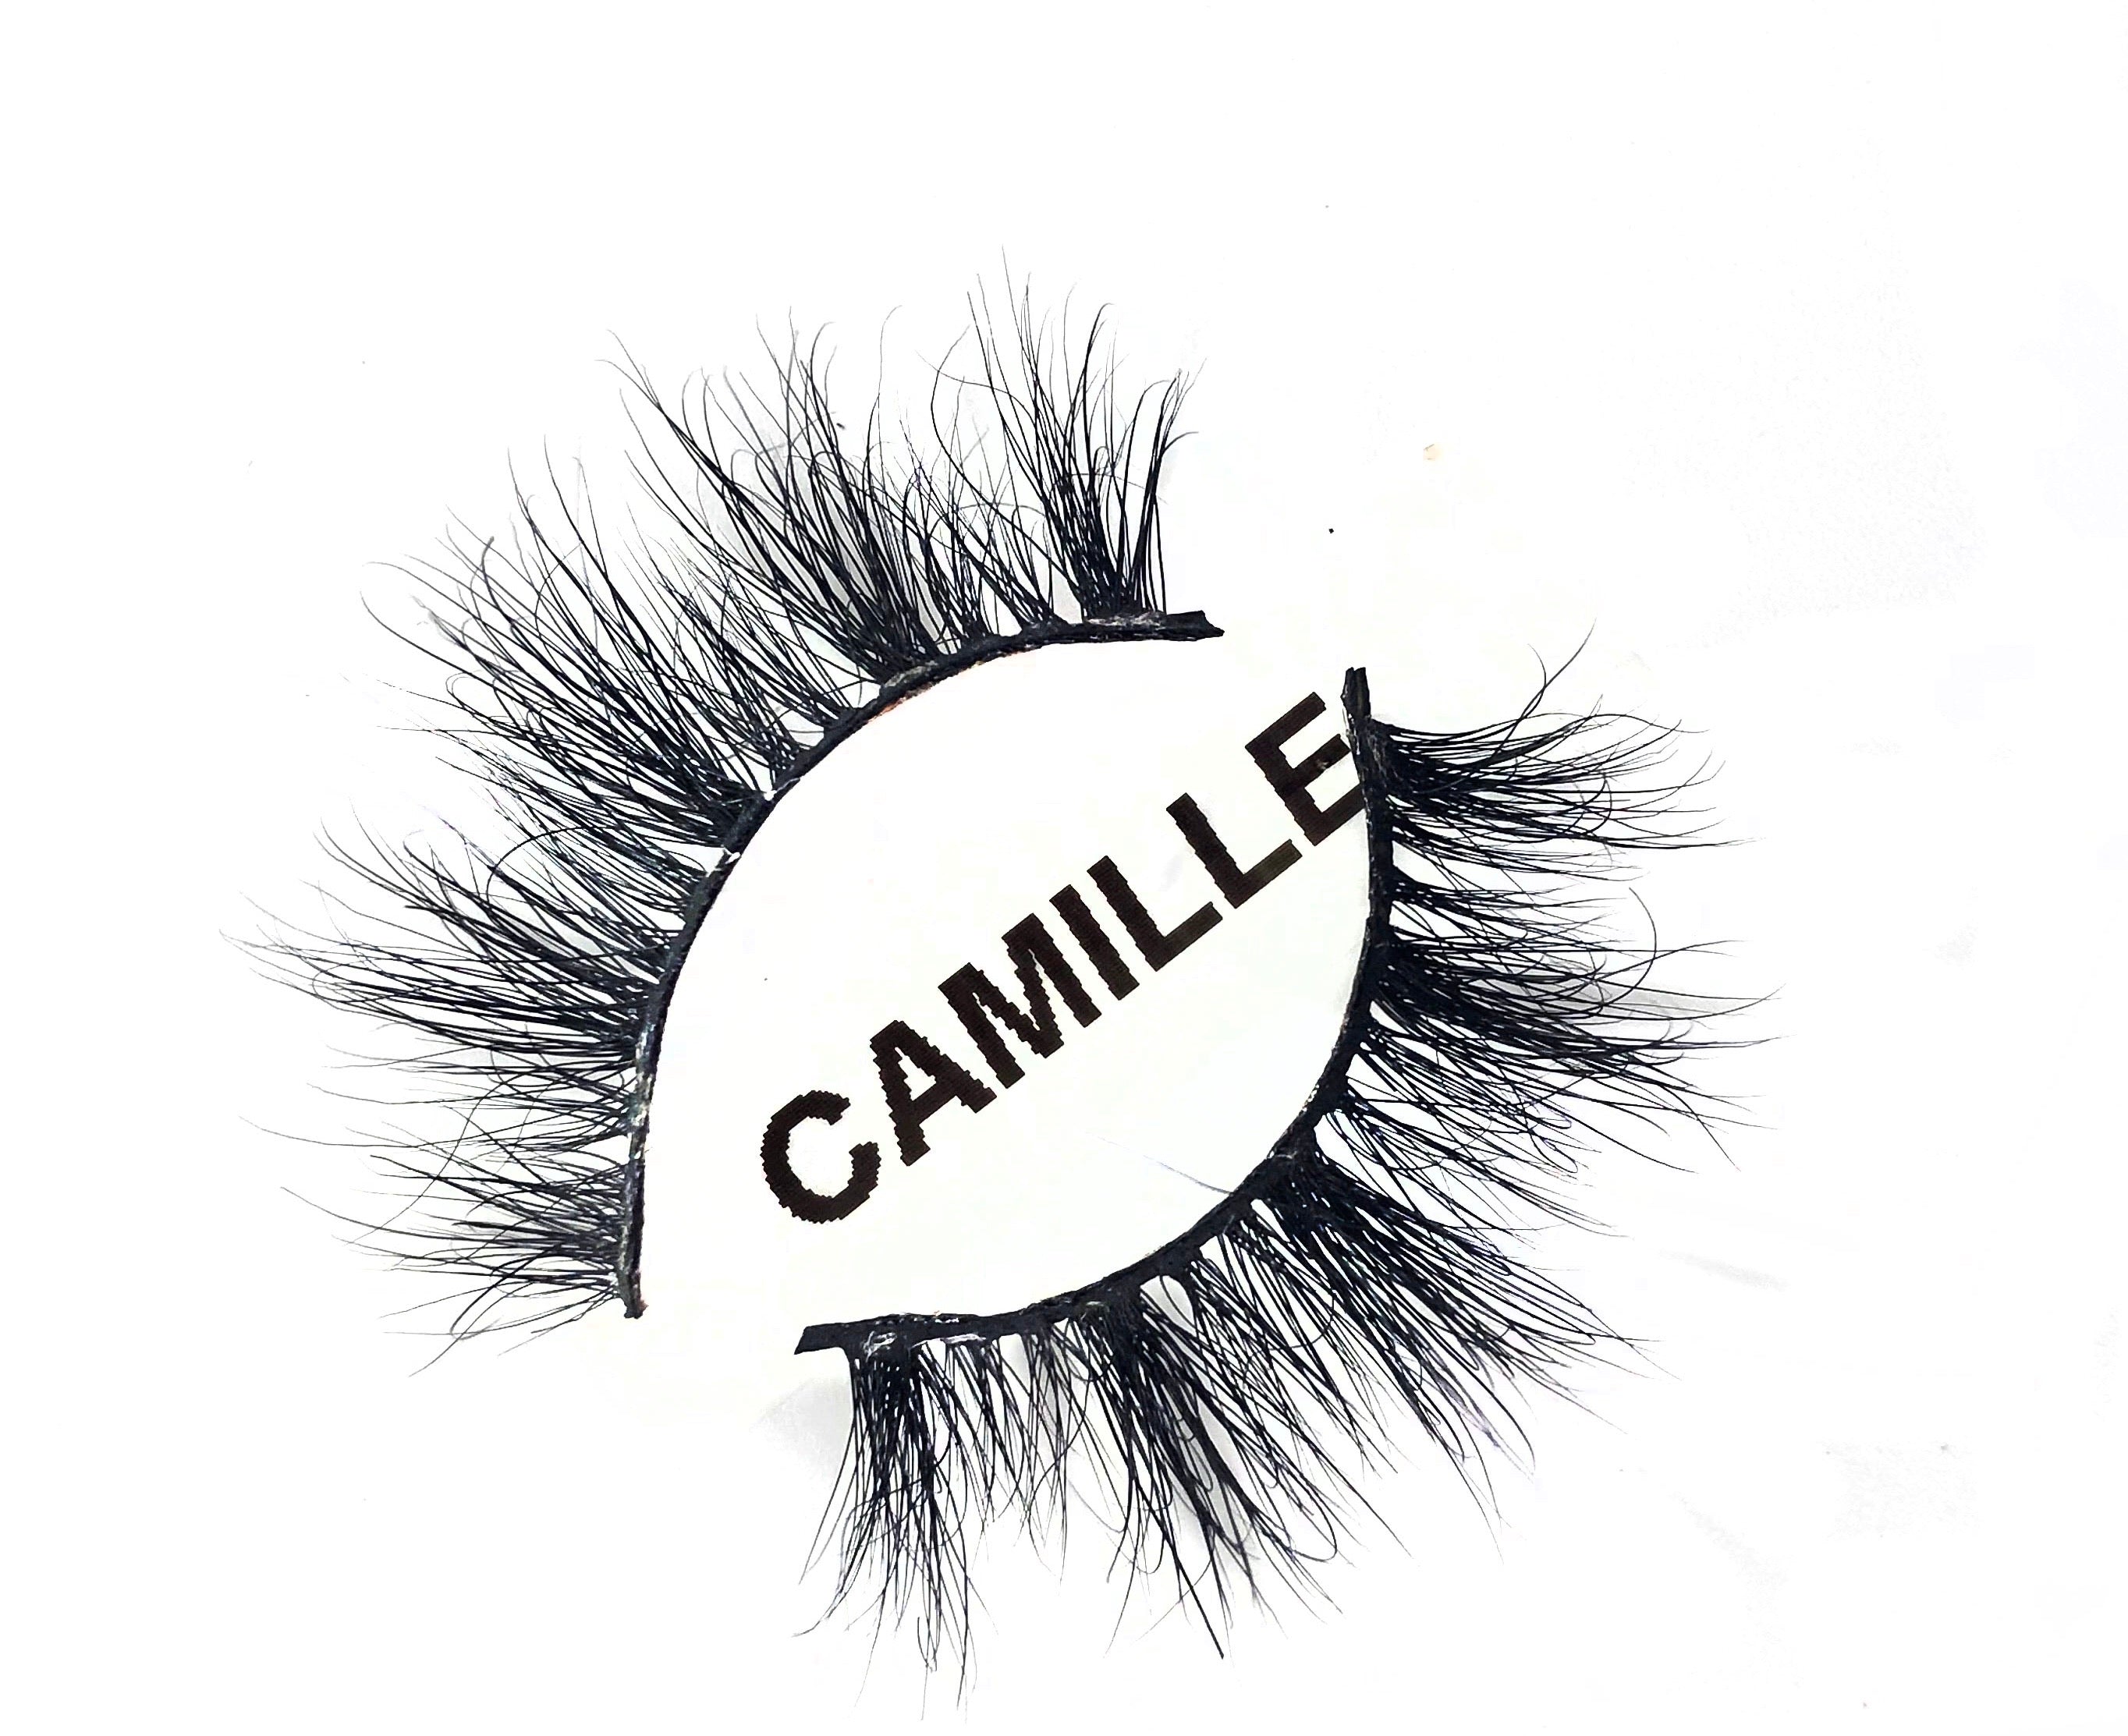 CAMILLE